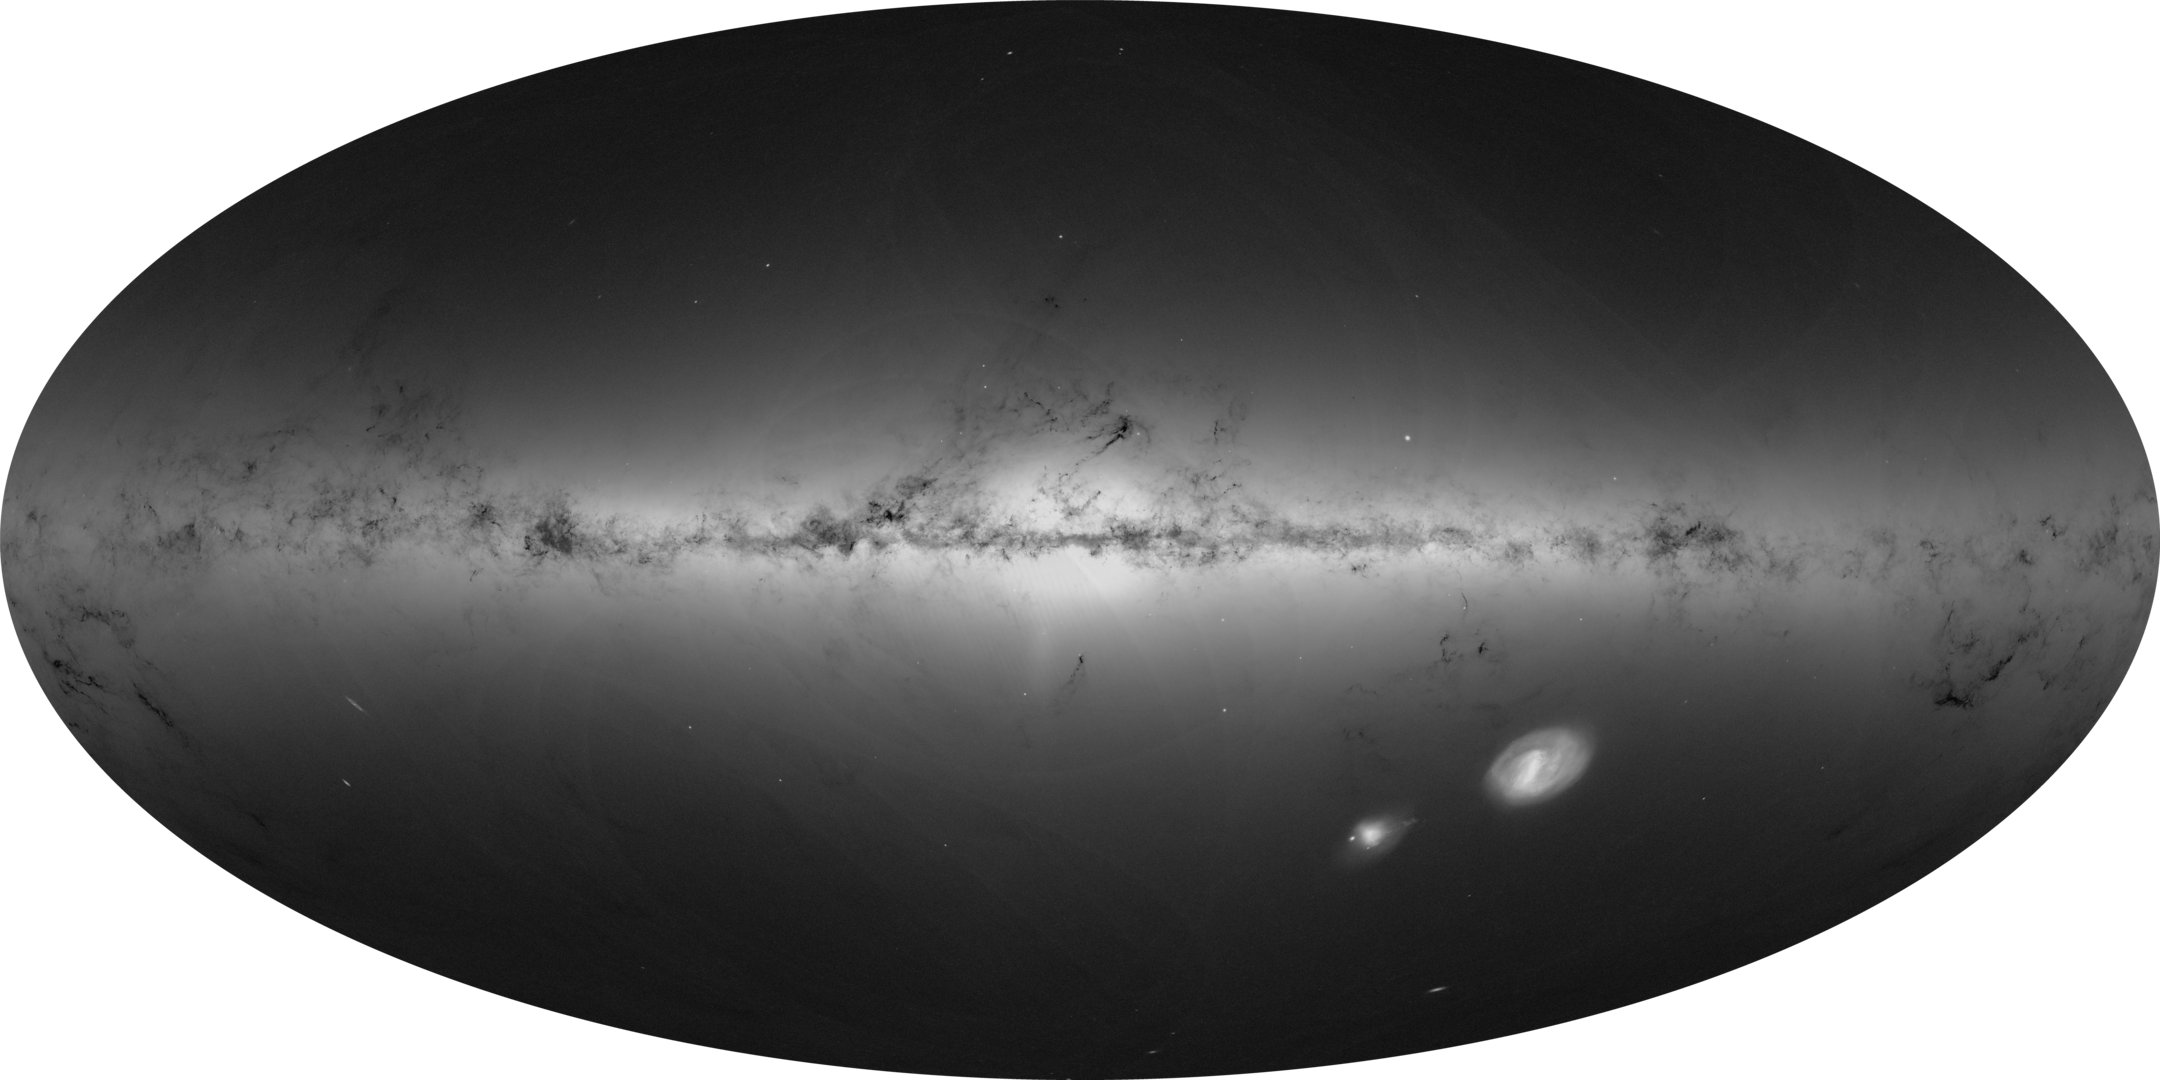 https://www.esa.int/var/esa/storage/images/esa_multimedia/images/2020/12/the_density_of_stars_from_gaia_s_early_data_release_32/22358886-1-eng-GB/The_density_of_stars_from_Gaia_s_Early_Data_Release_3_pillars.png